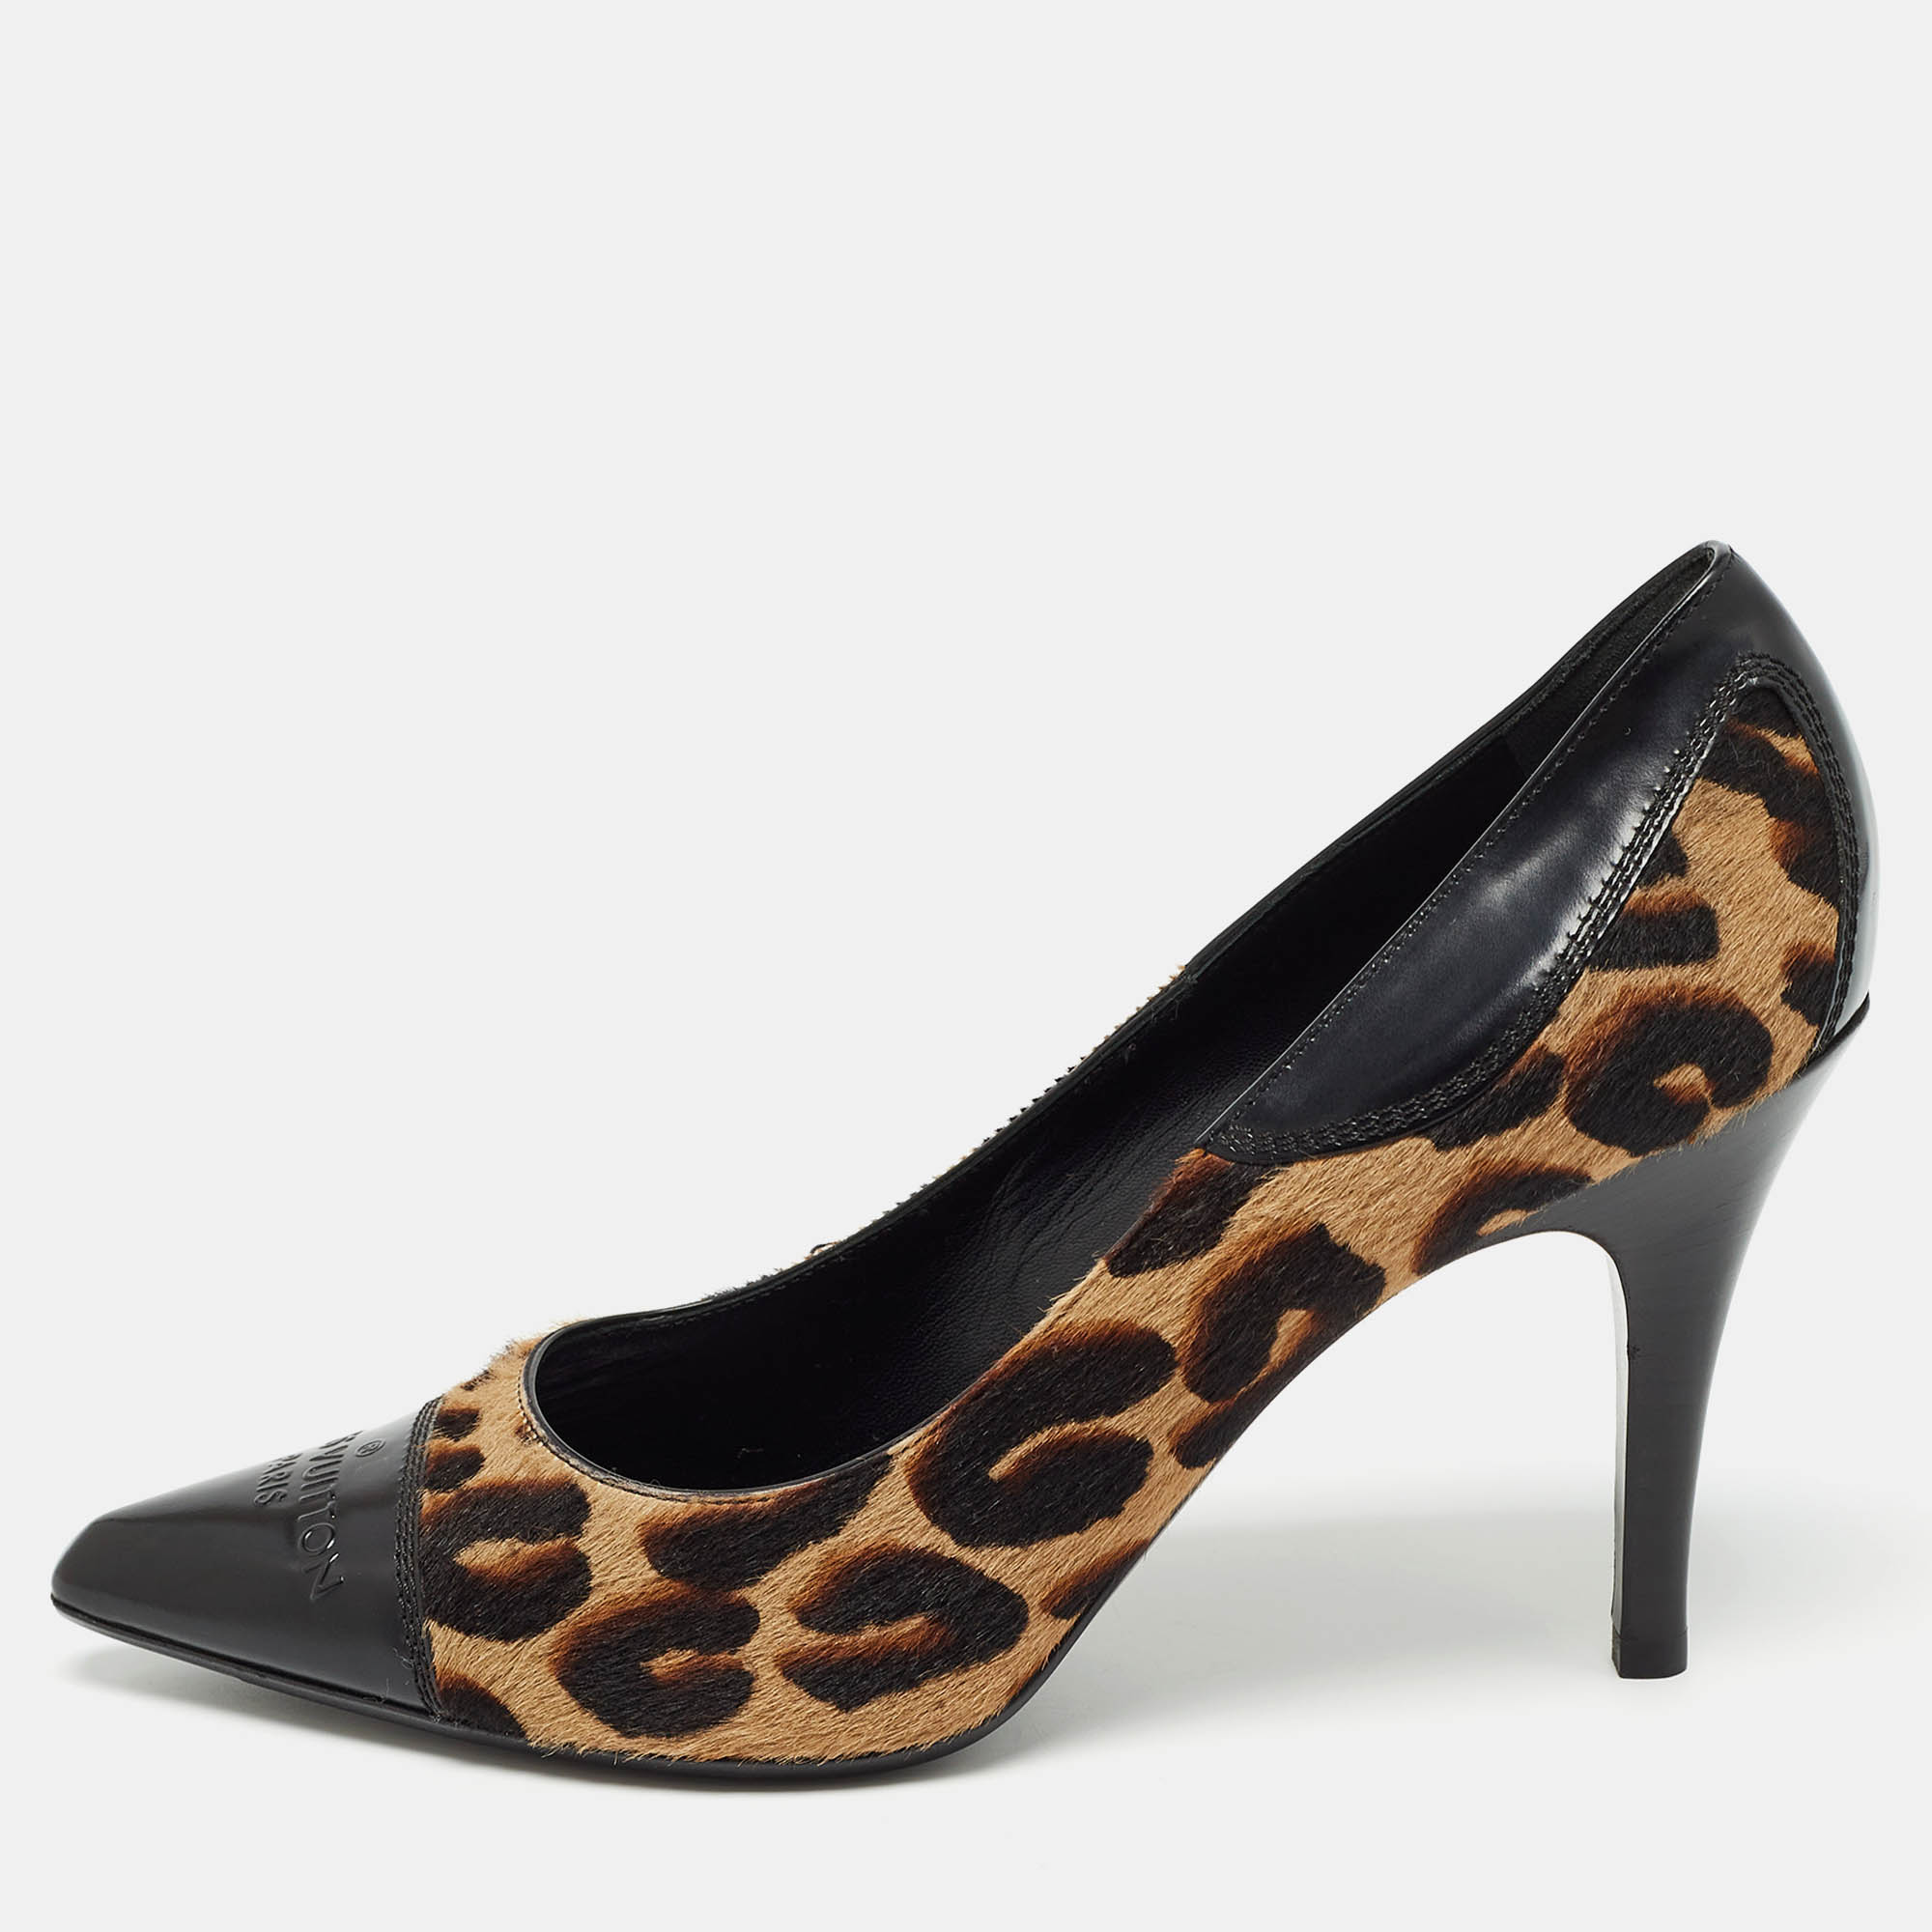 Pre-owned Louis Vuitton Tricolor Leopard Print Calf Hair And Leather Cap Toe Pumps Size 38.5 In Black